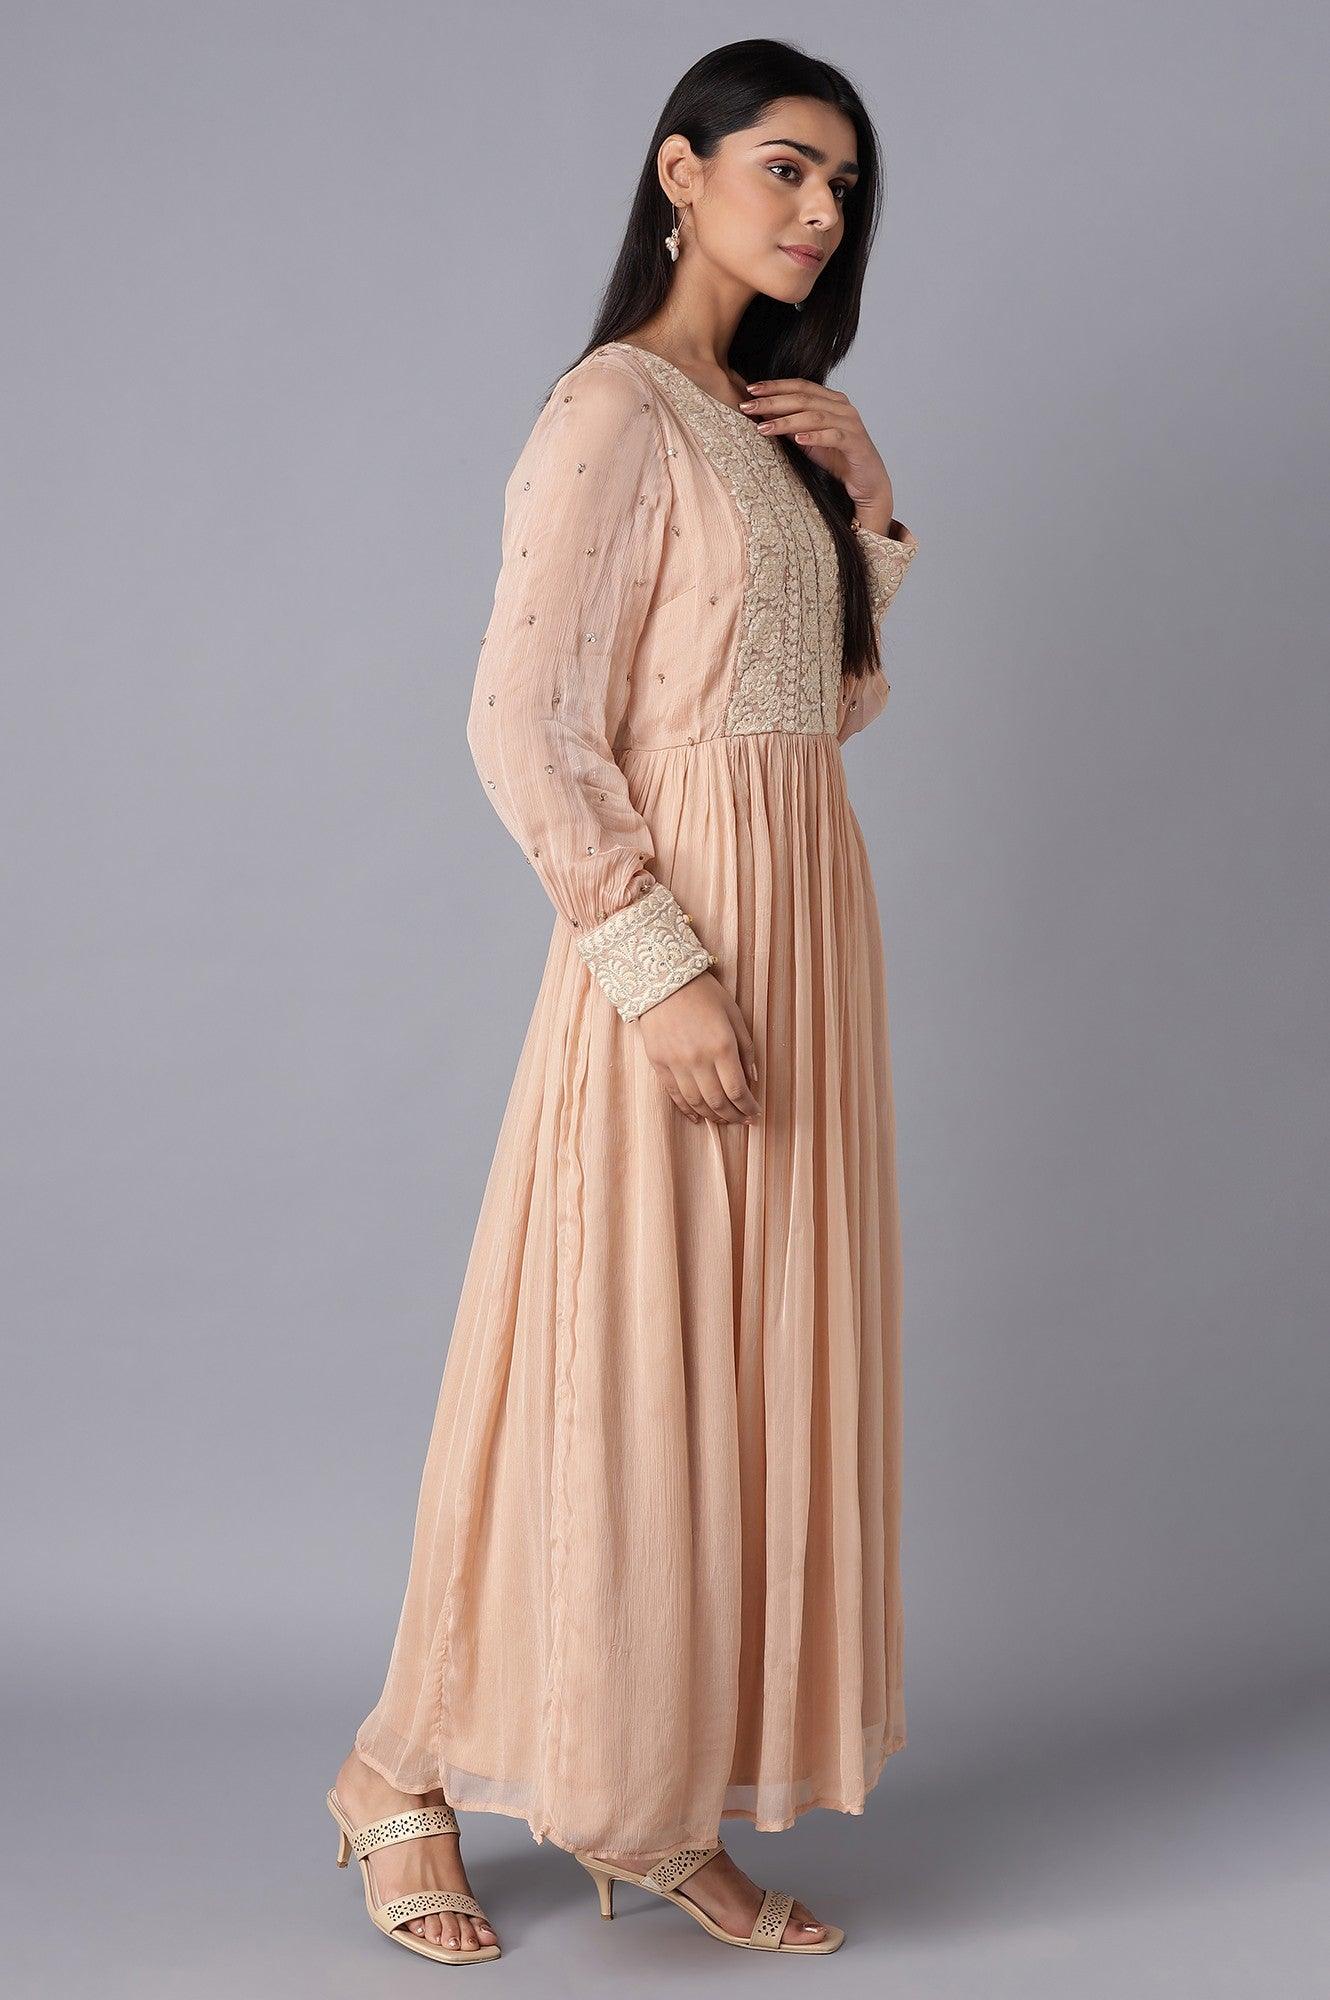 Light Pink Embroidered Victorian Dress with Gathered Sleeves - wforwoman